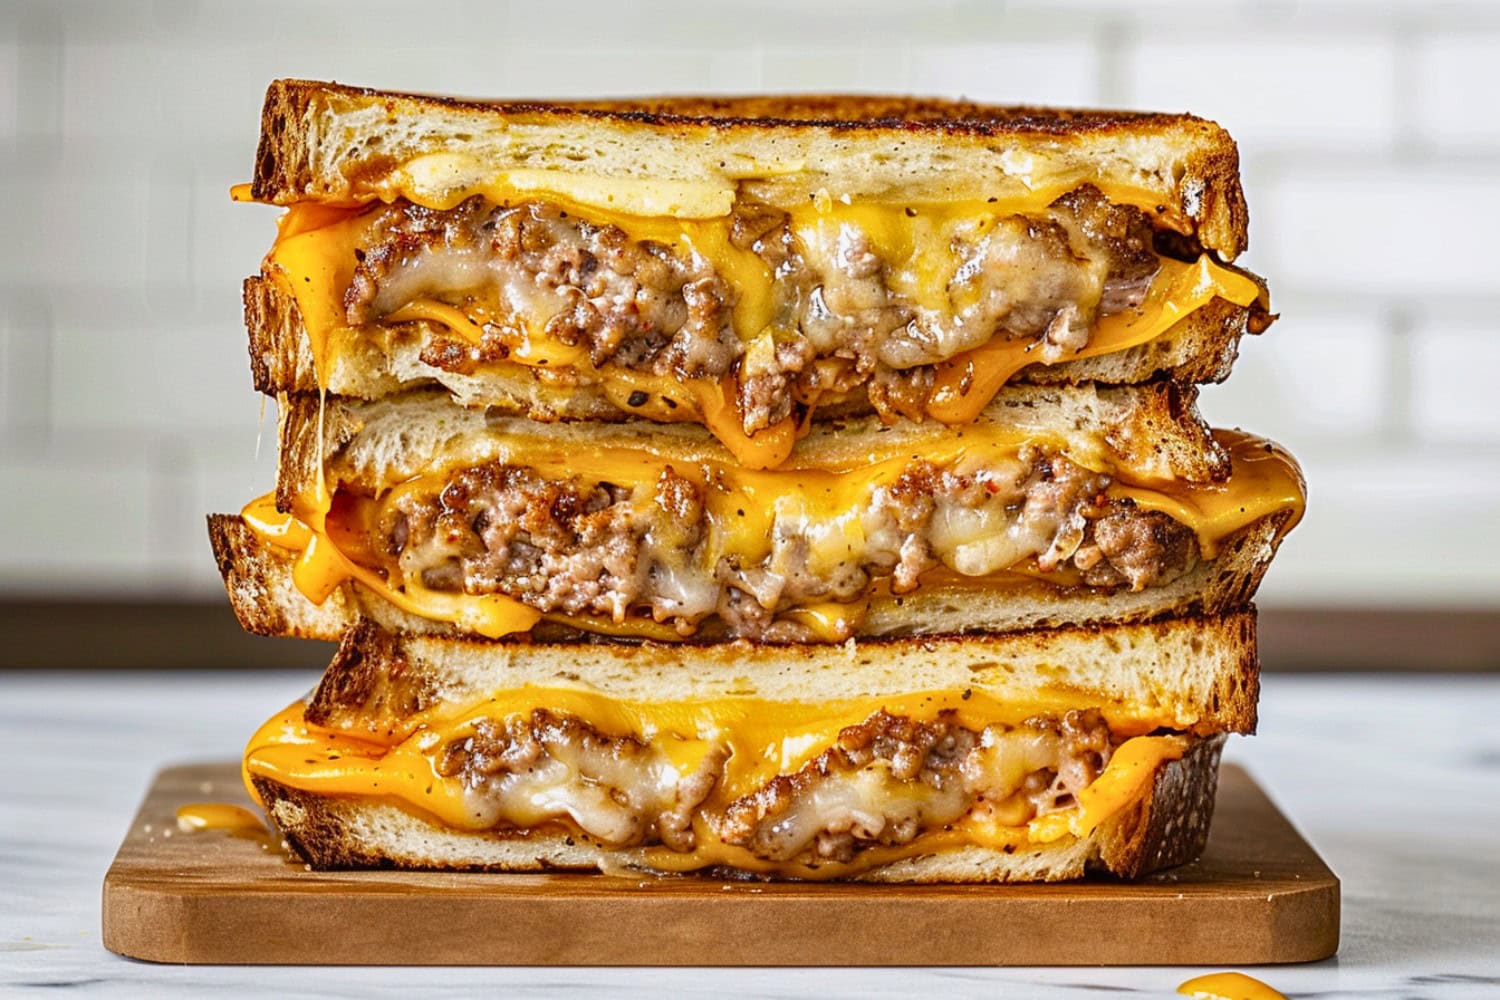 Three Cut Halves of Patty Melts with Gooey Cheese and Juicy Burgers Stacked on a Wooden Cutting Board on a White Marble Table